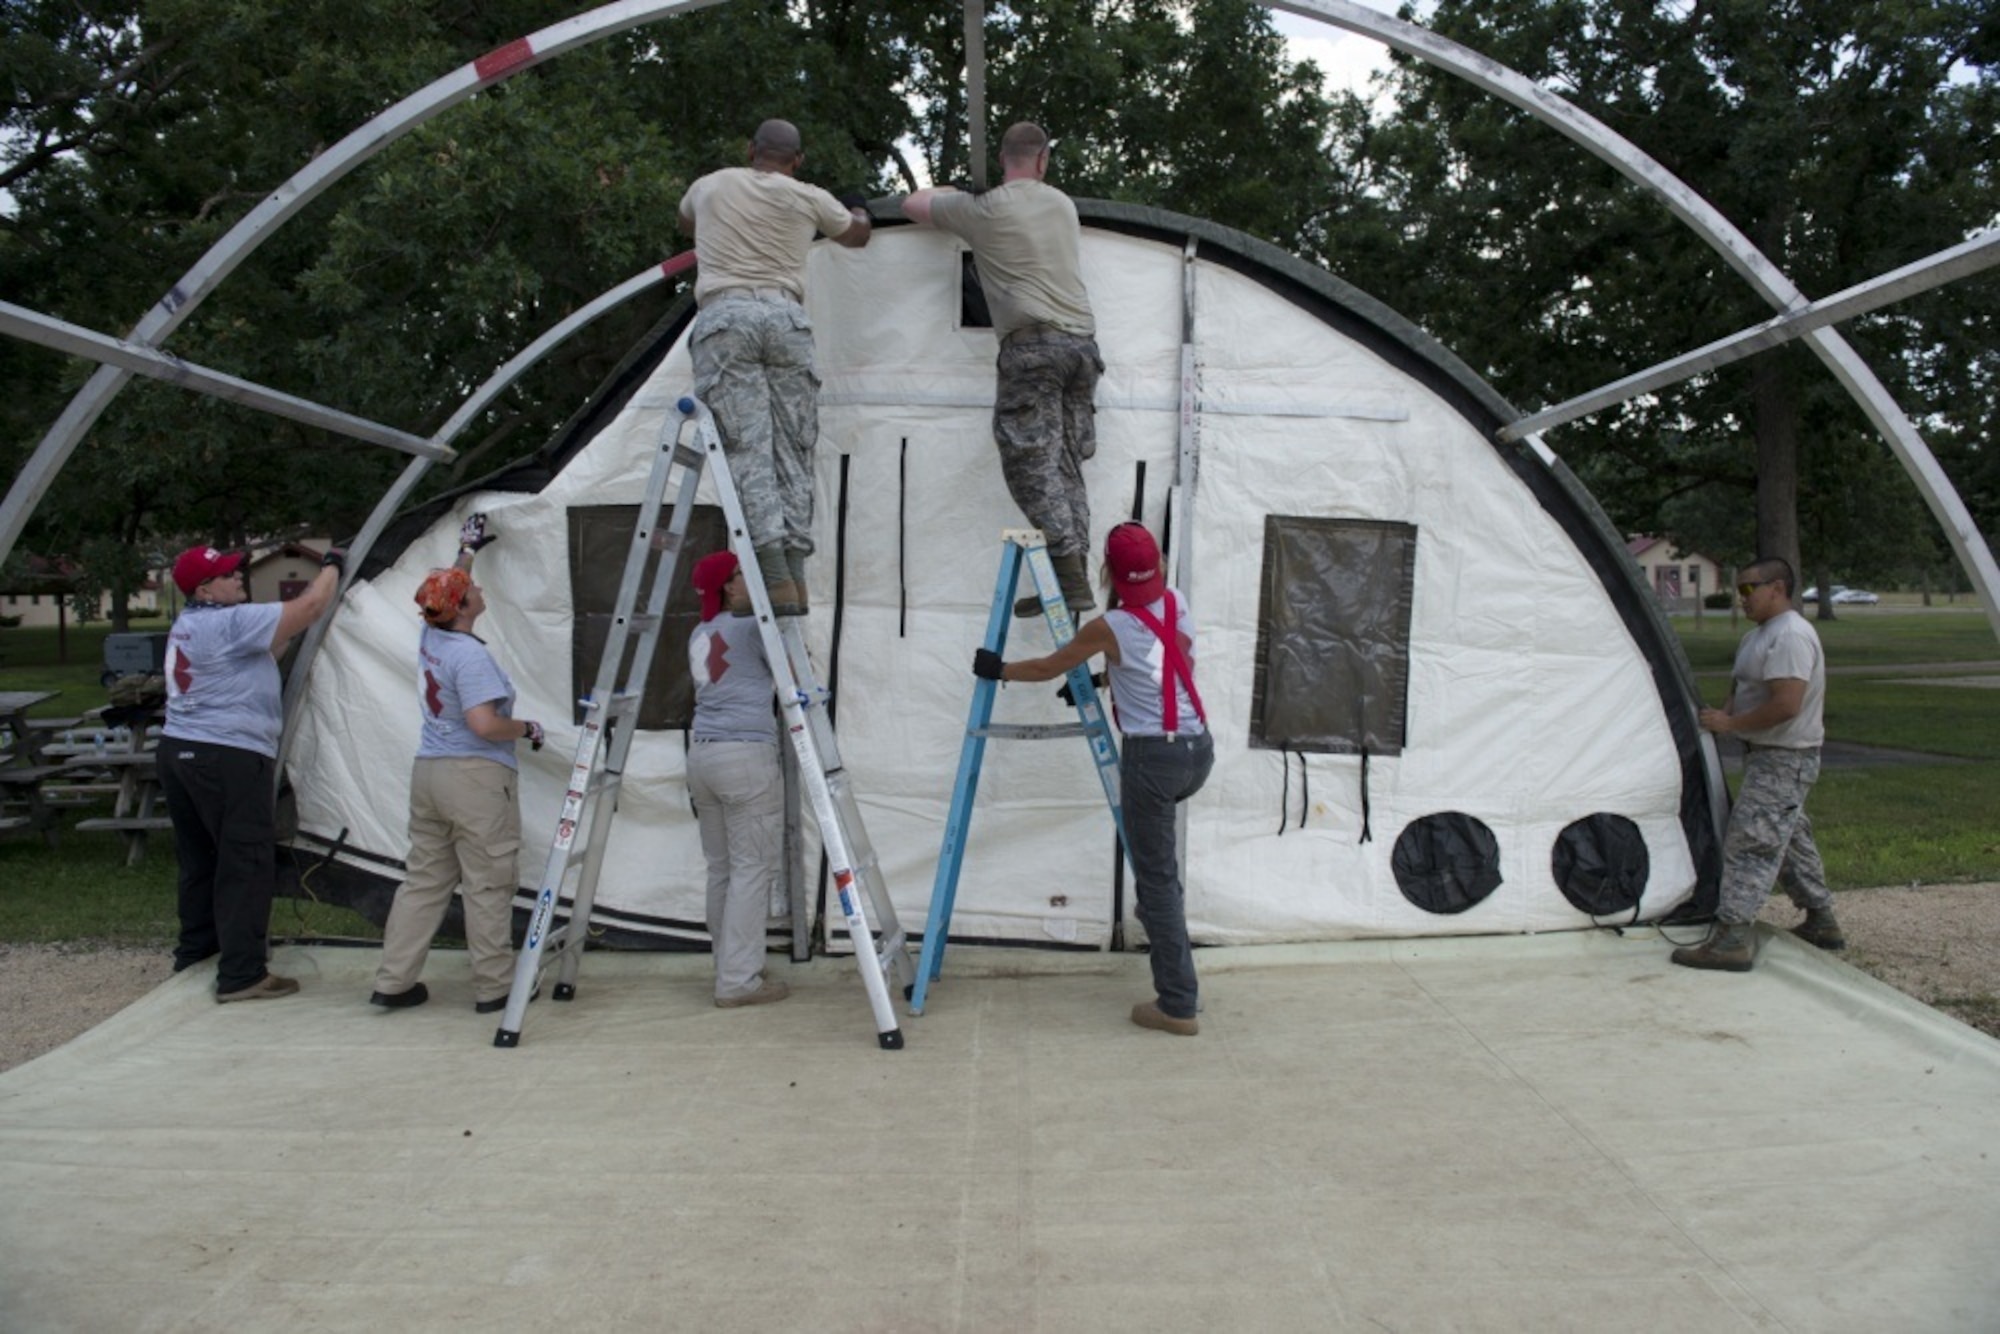 Members of the 103rd Civil Engineer Squadron and Team Rubicon work together to set up a tent, Sunday, July 15, 2018, during the PATRIOT North 18 Exercise, at Volk Field Air National Guard Base, Wis. The tent was used as a dining facility during the exercise. (Air National Guard photo by Tech. Sgt. Tamara R. Dabney)